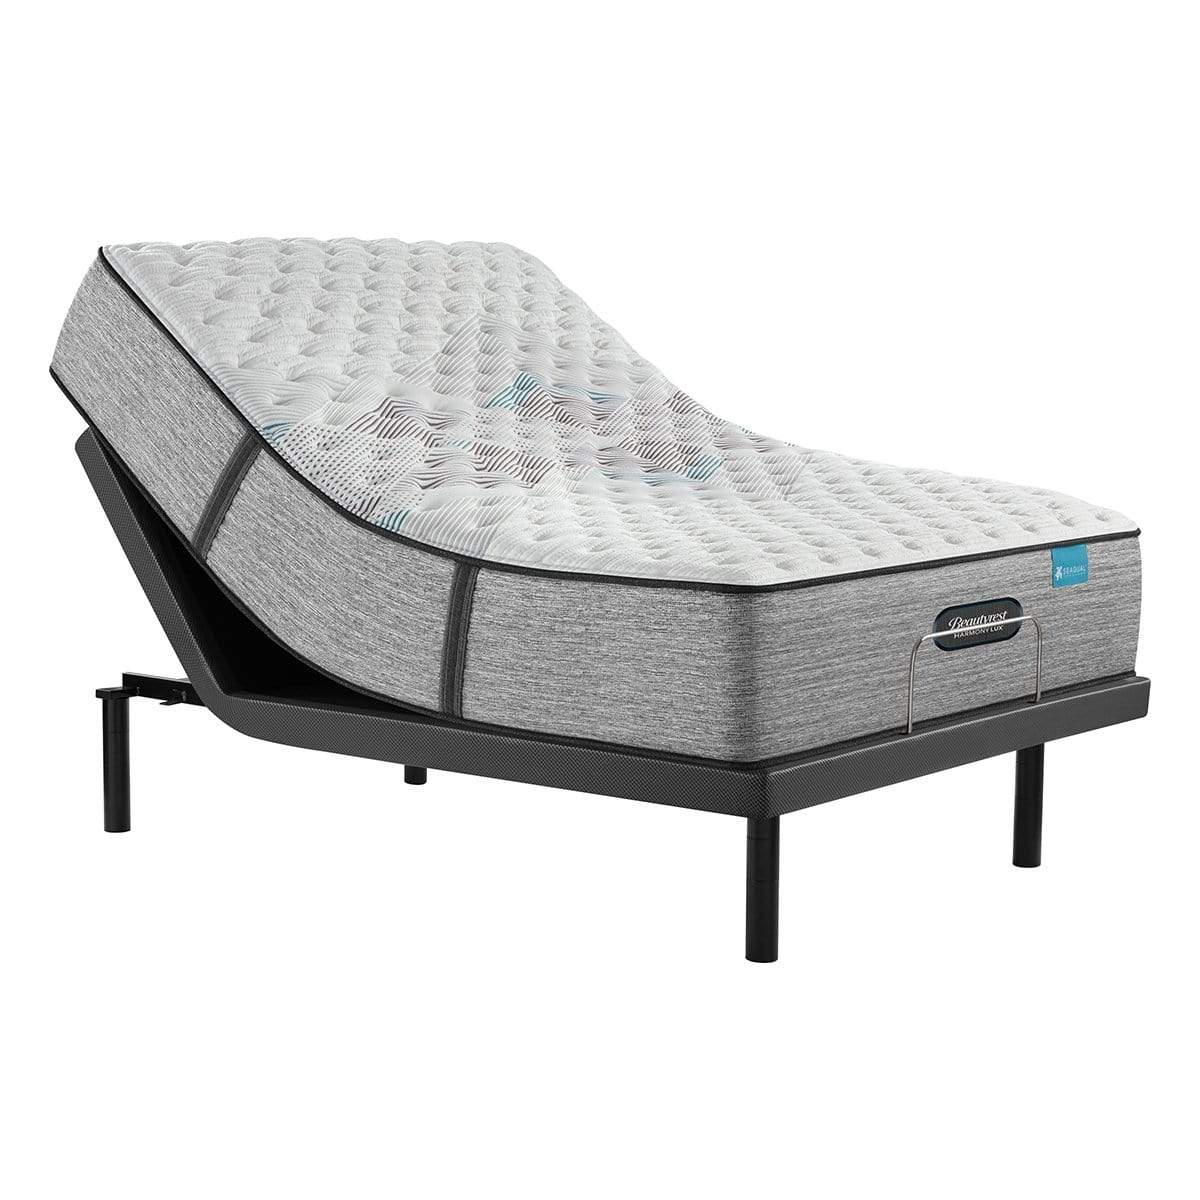 Beautyrest Harmony Lux Extra Firm Mattress On Adjustable Base